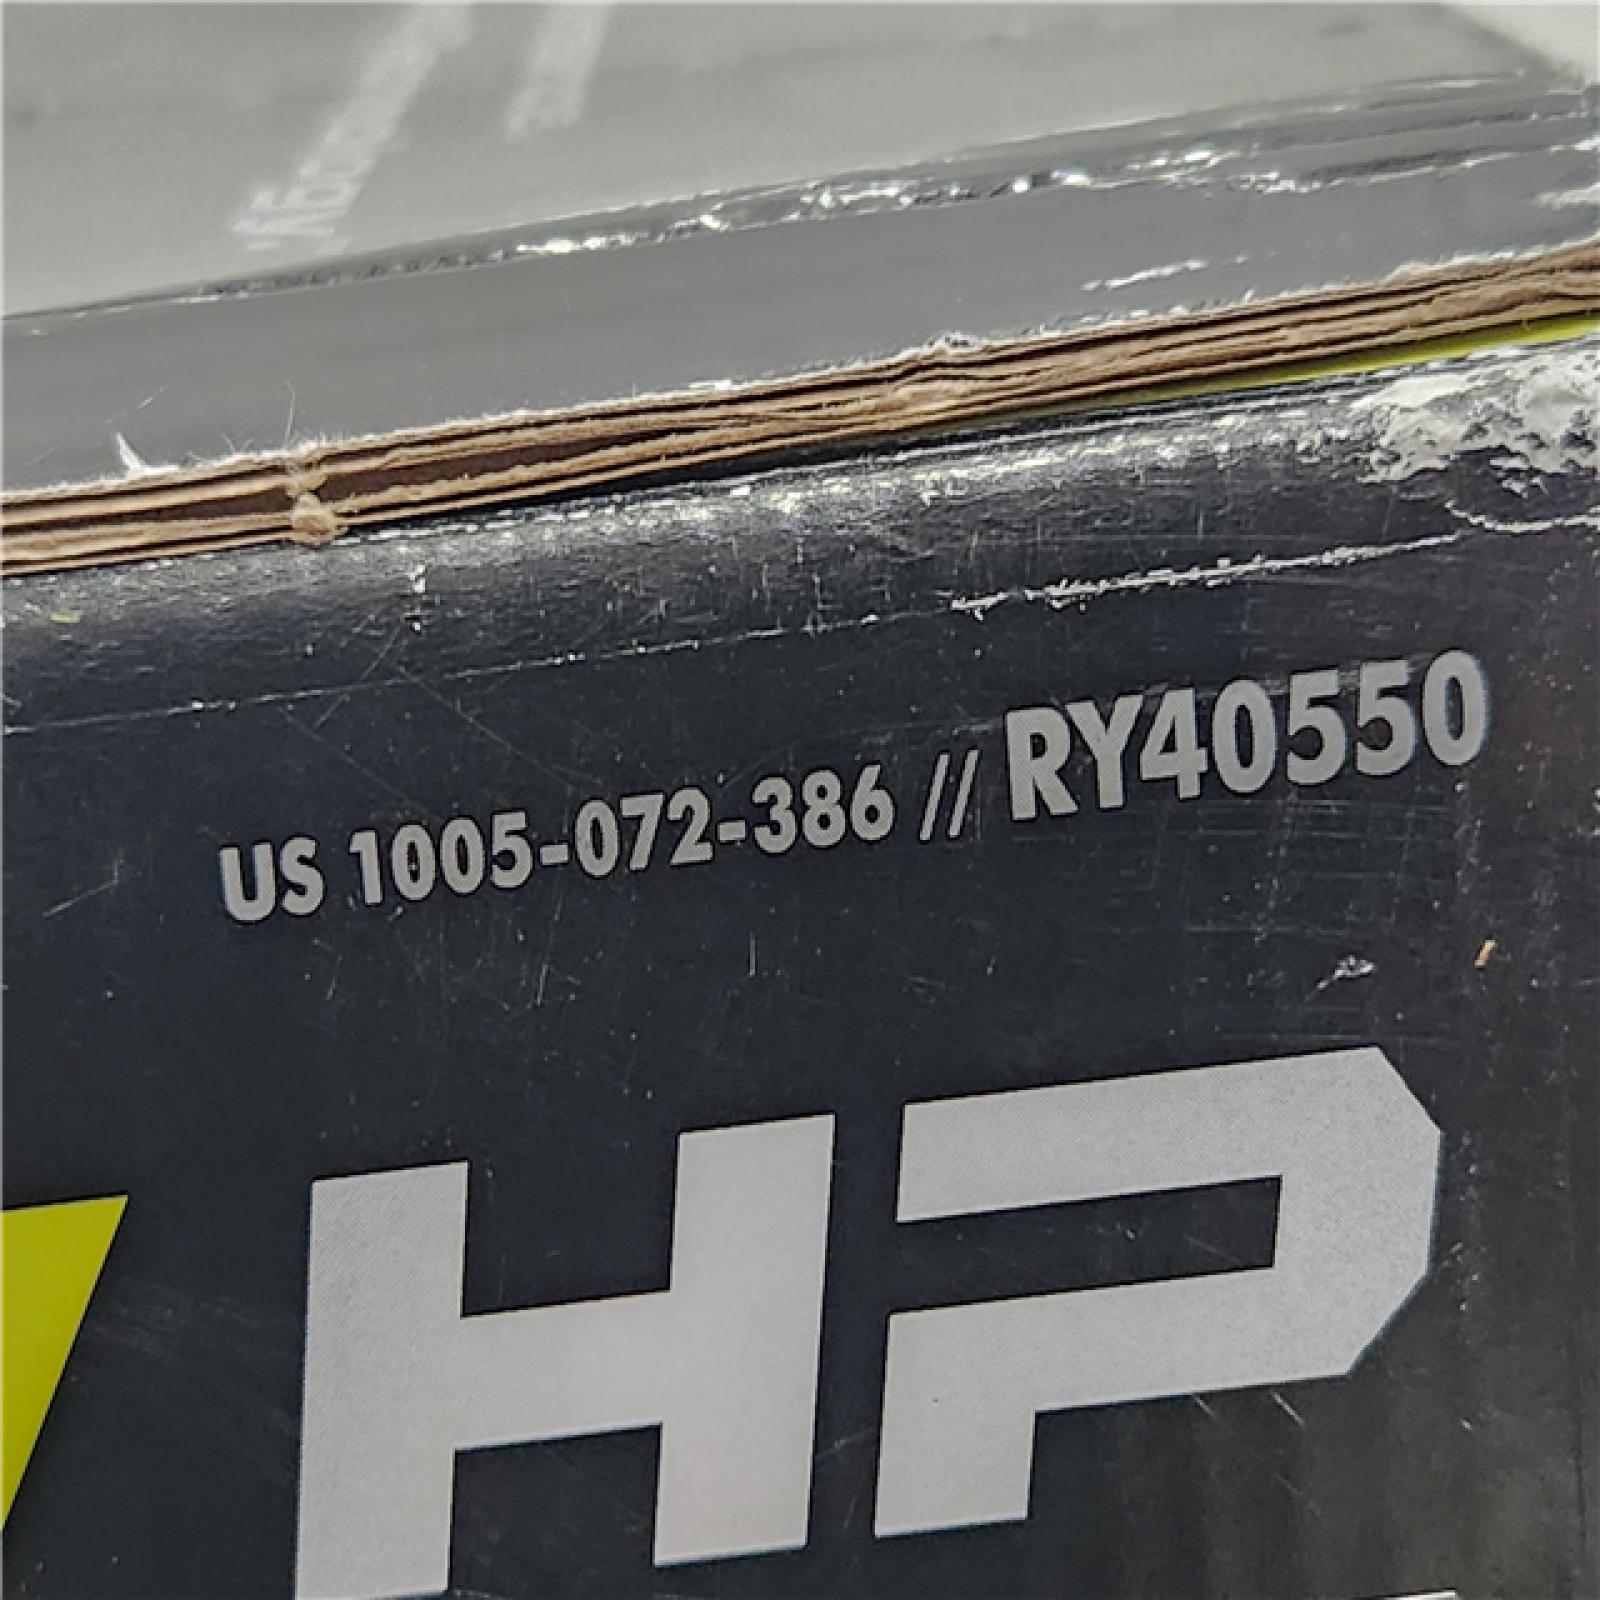 Phoenix Location Appears NEW RYOBI 40V HP Brushless 16 in. Battery Chainsaw with 4.0 Ah Battery and Charger